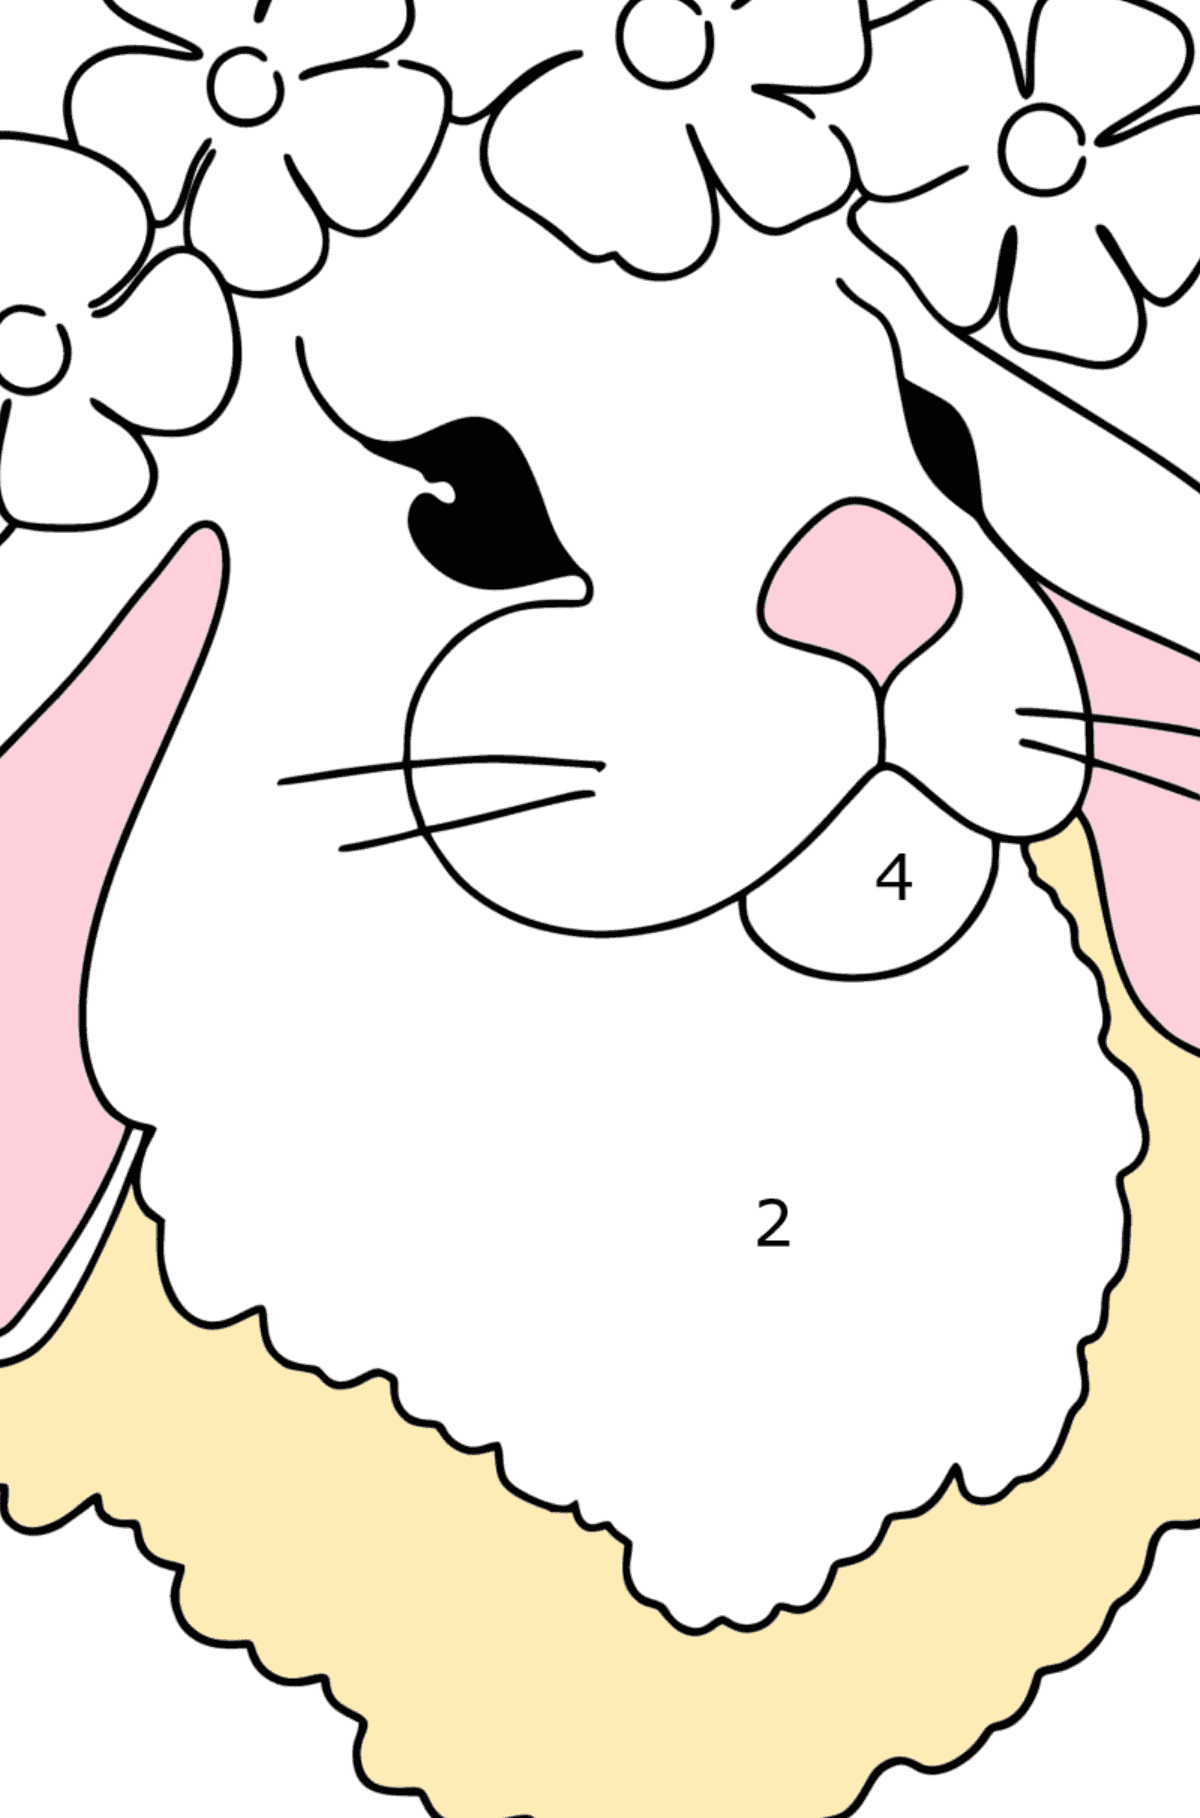 Hare Face coloring page - Coloring by Numbers for Kids